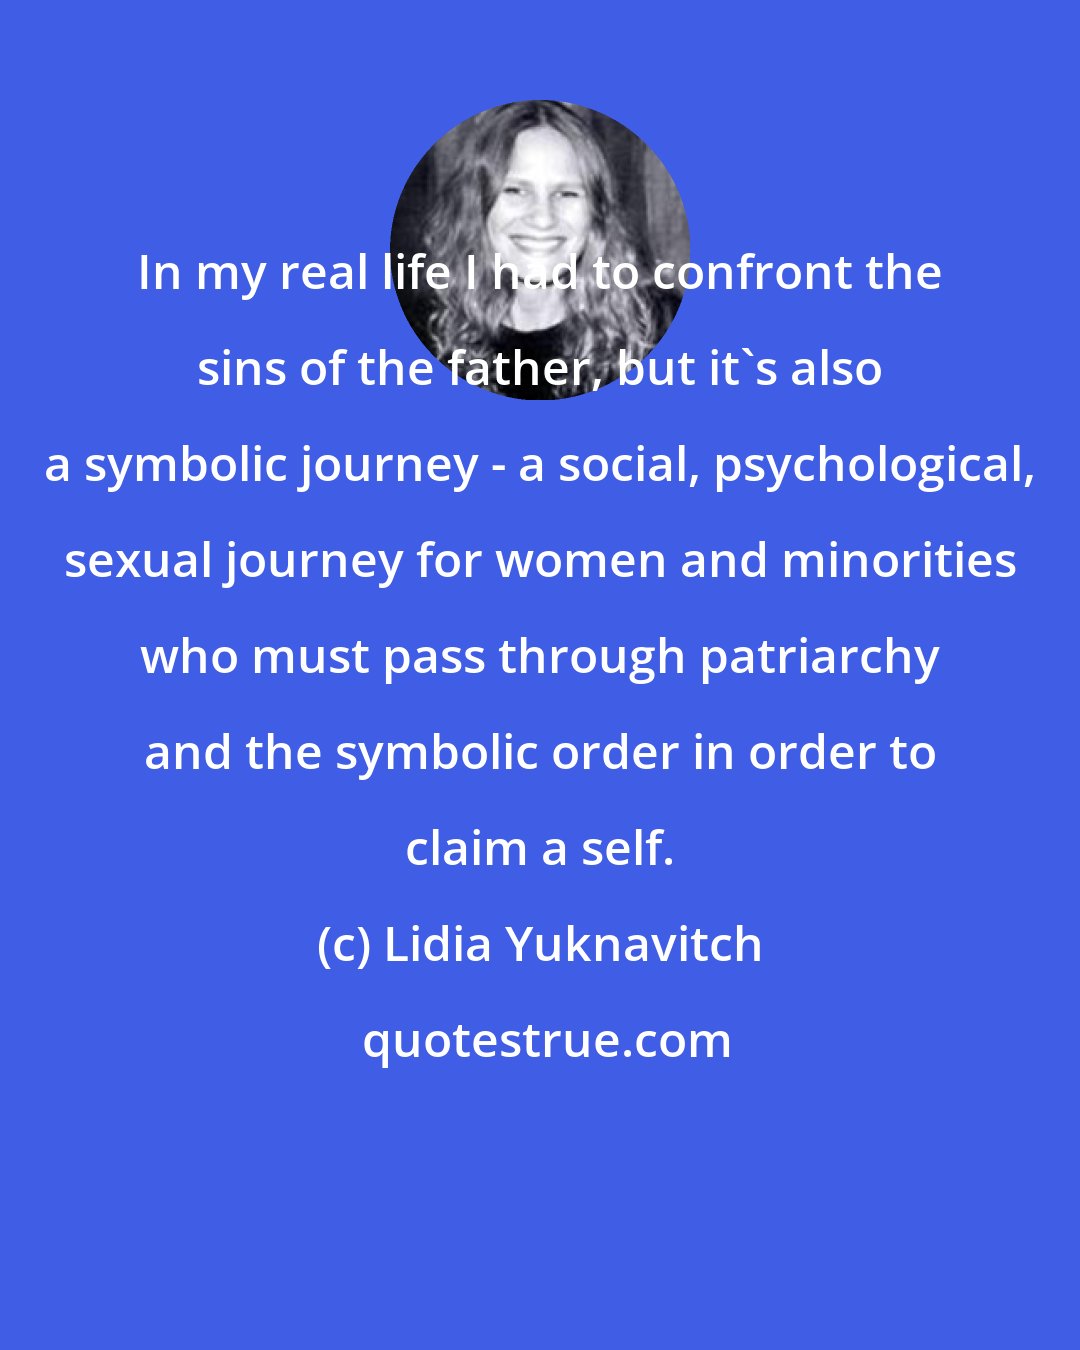 Lidia Yuknavitch: In my real life I had to confront the sins of the father, but it's also a symbolic journey - a social, psychological, sexual journey for women and minorities who must pass through patriarchy and the symbolic order in order to claim a self.